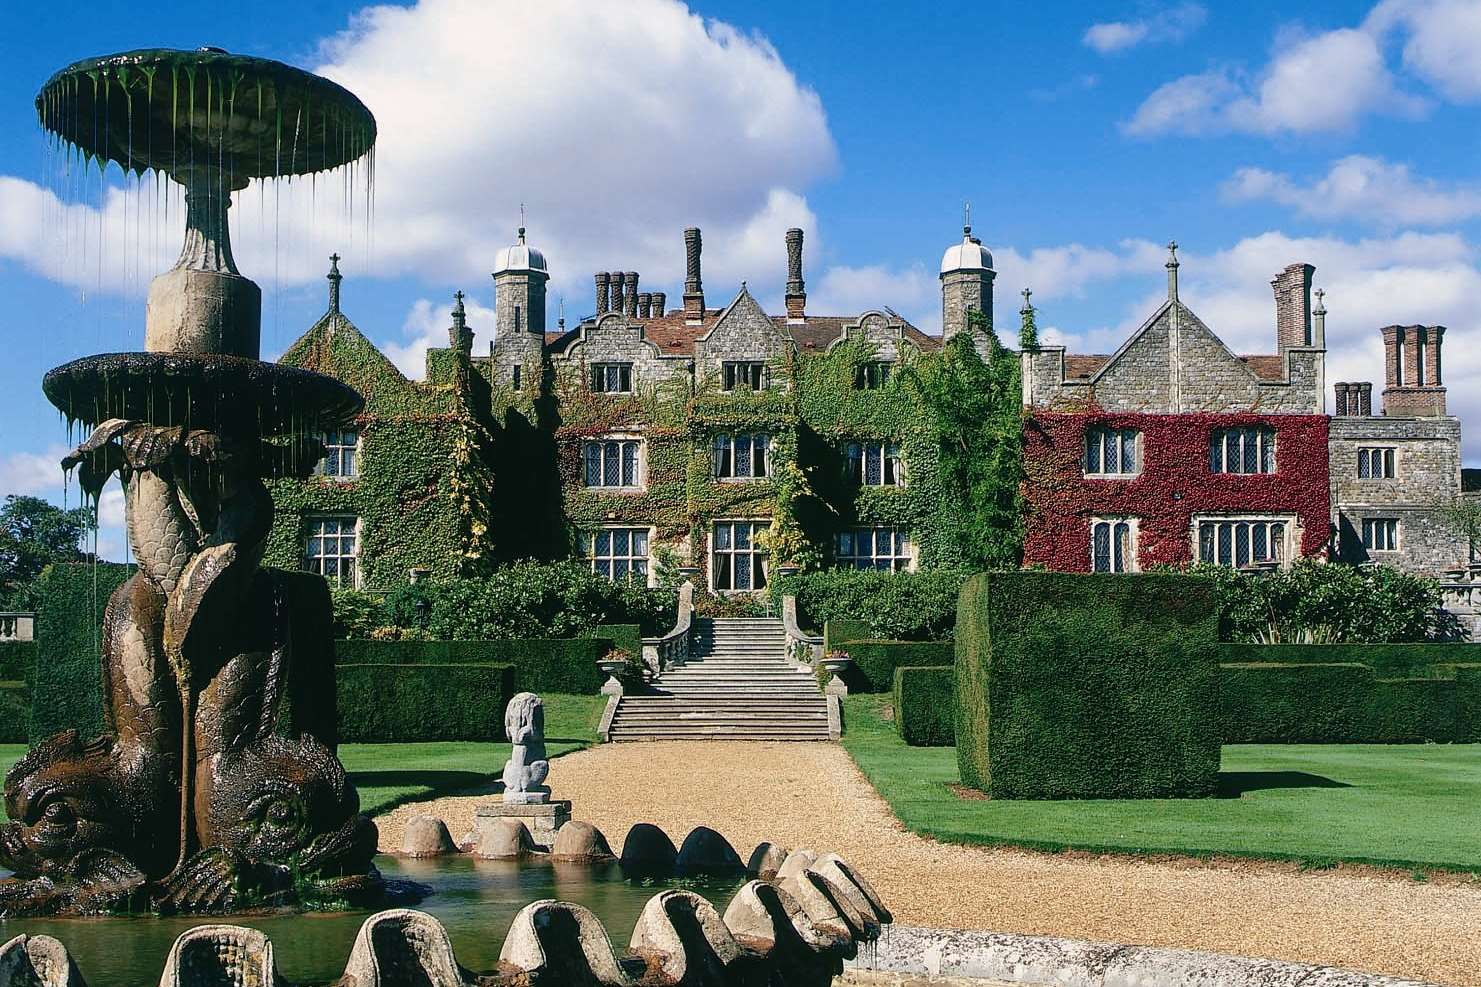 The development has been compared to Eastwell Manor in Boughton Aluph